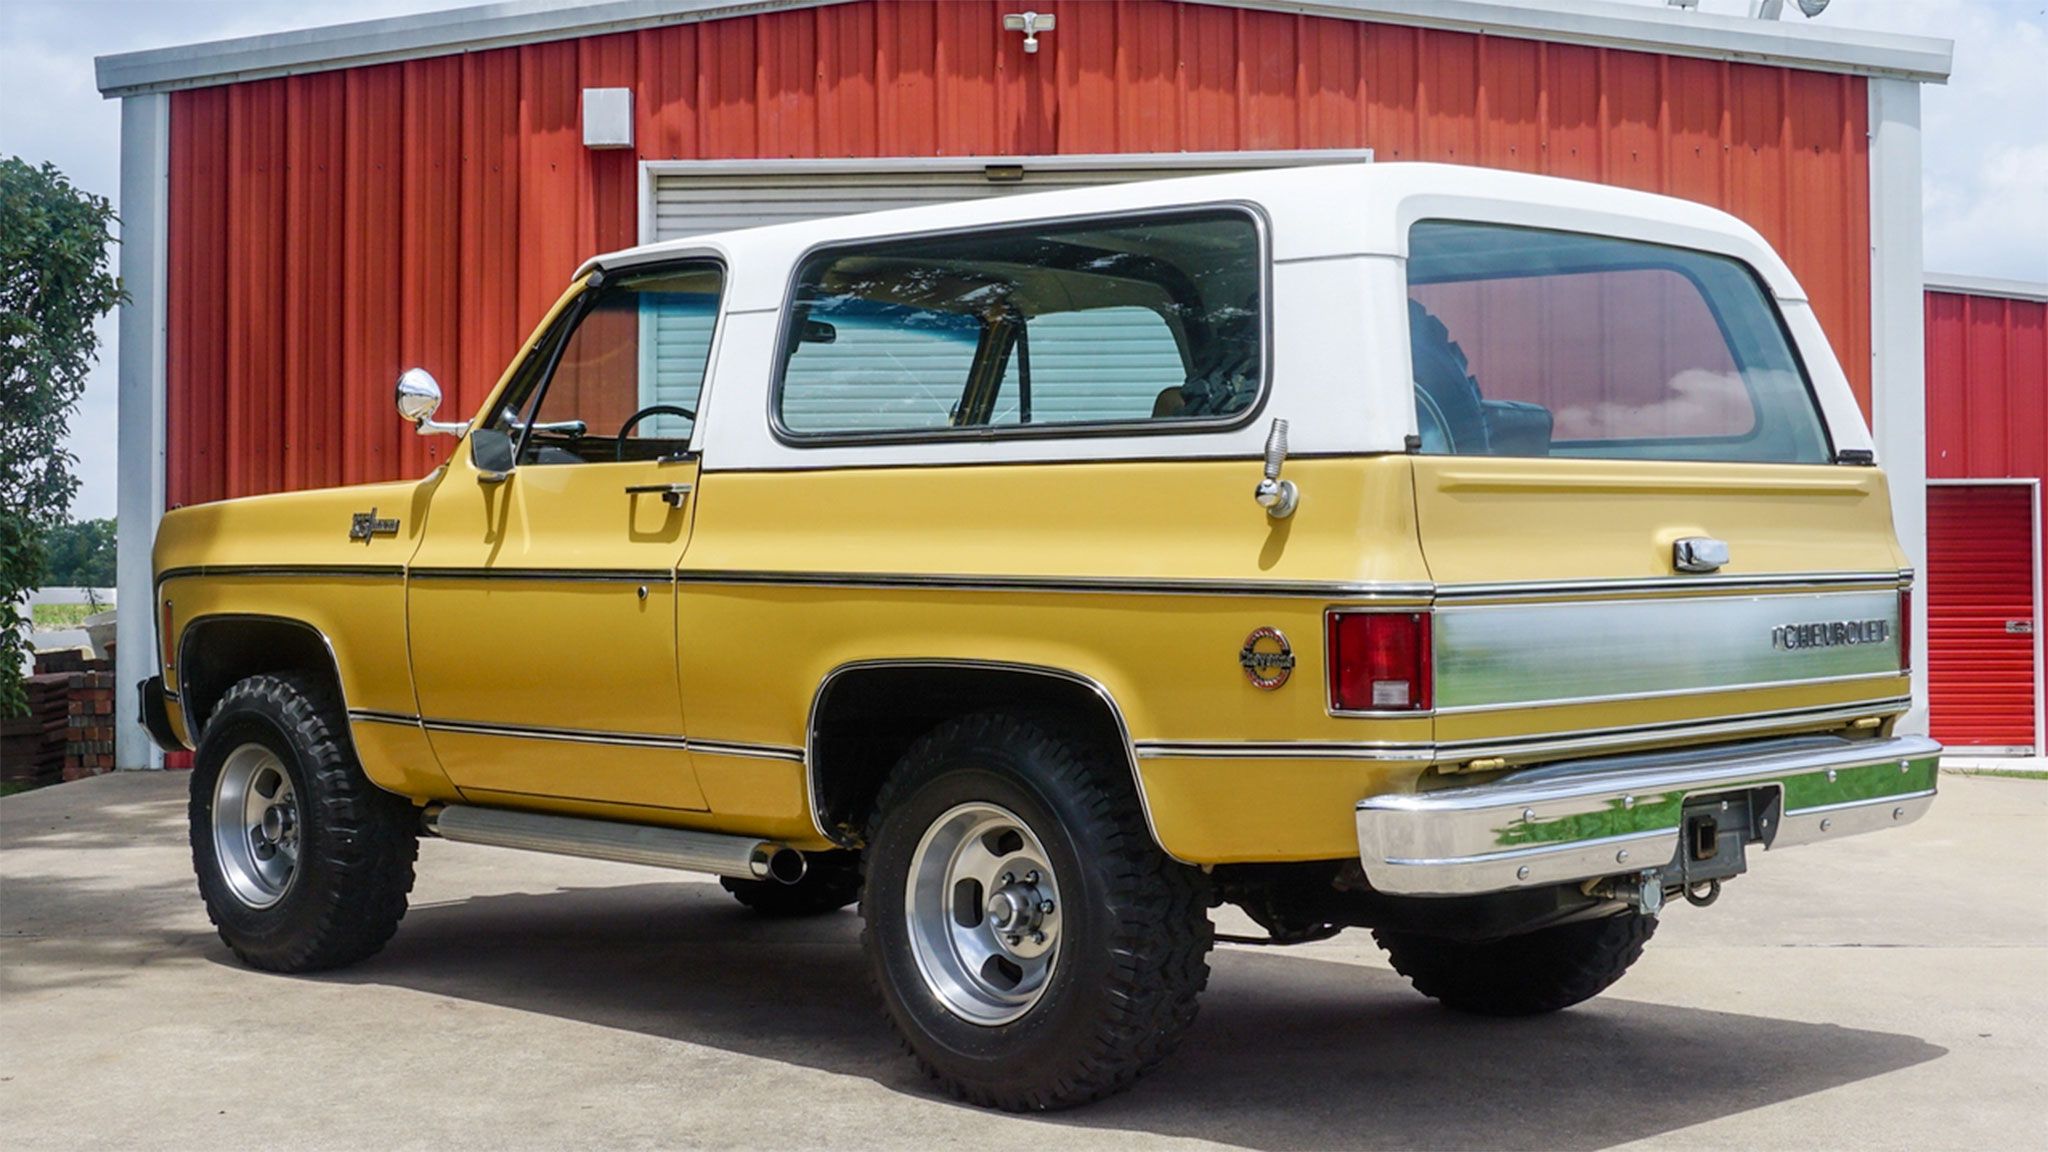 Totally Topless 1974 Chevy Square Body 4x4 K5 Blazer With 15K Miles